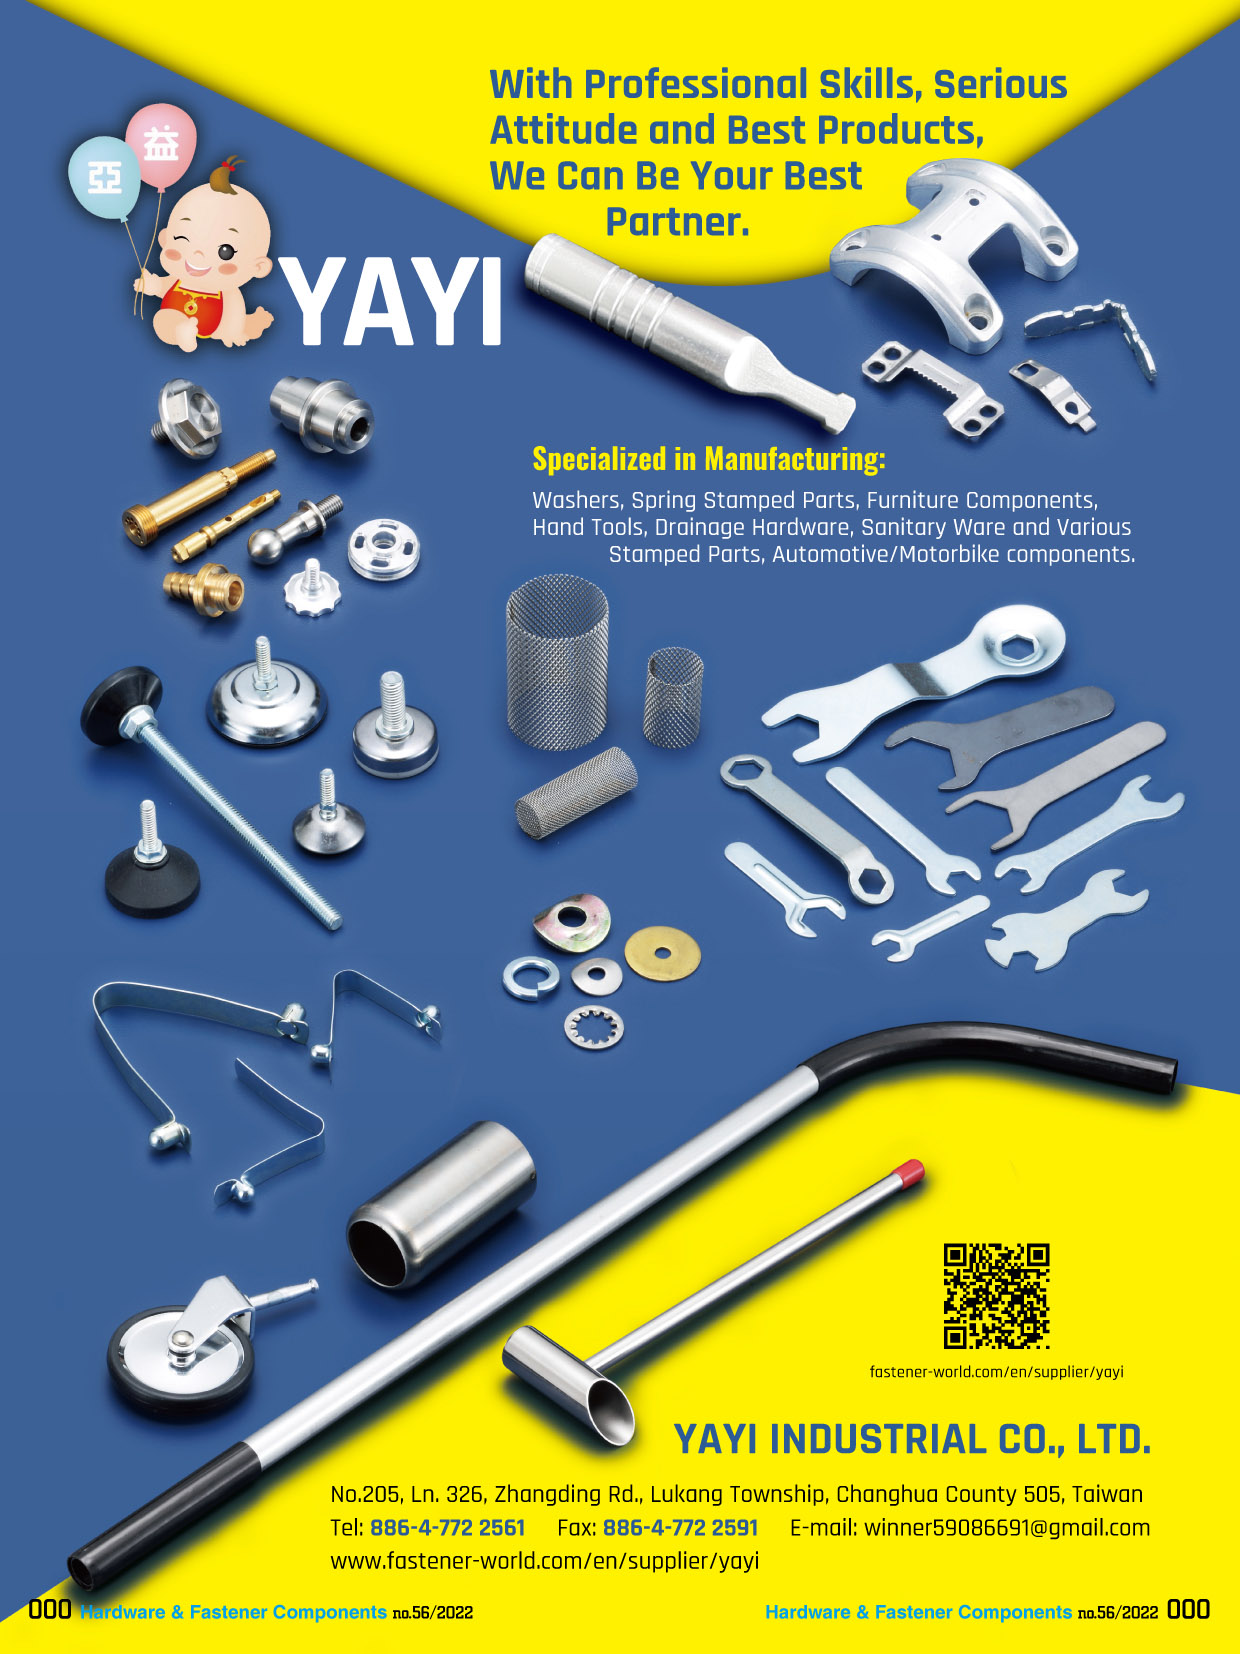 YAYI INDUSTRIAL CO., LTD. , Washers, Spring Stamped Parts, Furniture Components, Hand Tools, Drainage Hardware, Sanitary Ware and Various Stamped Parts, Automotive/Motorbike Components